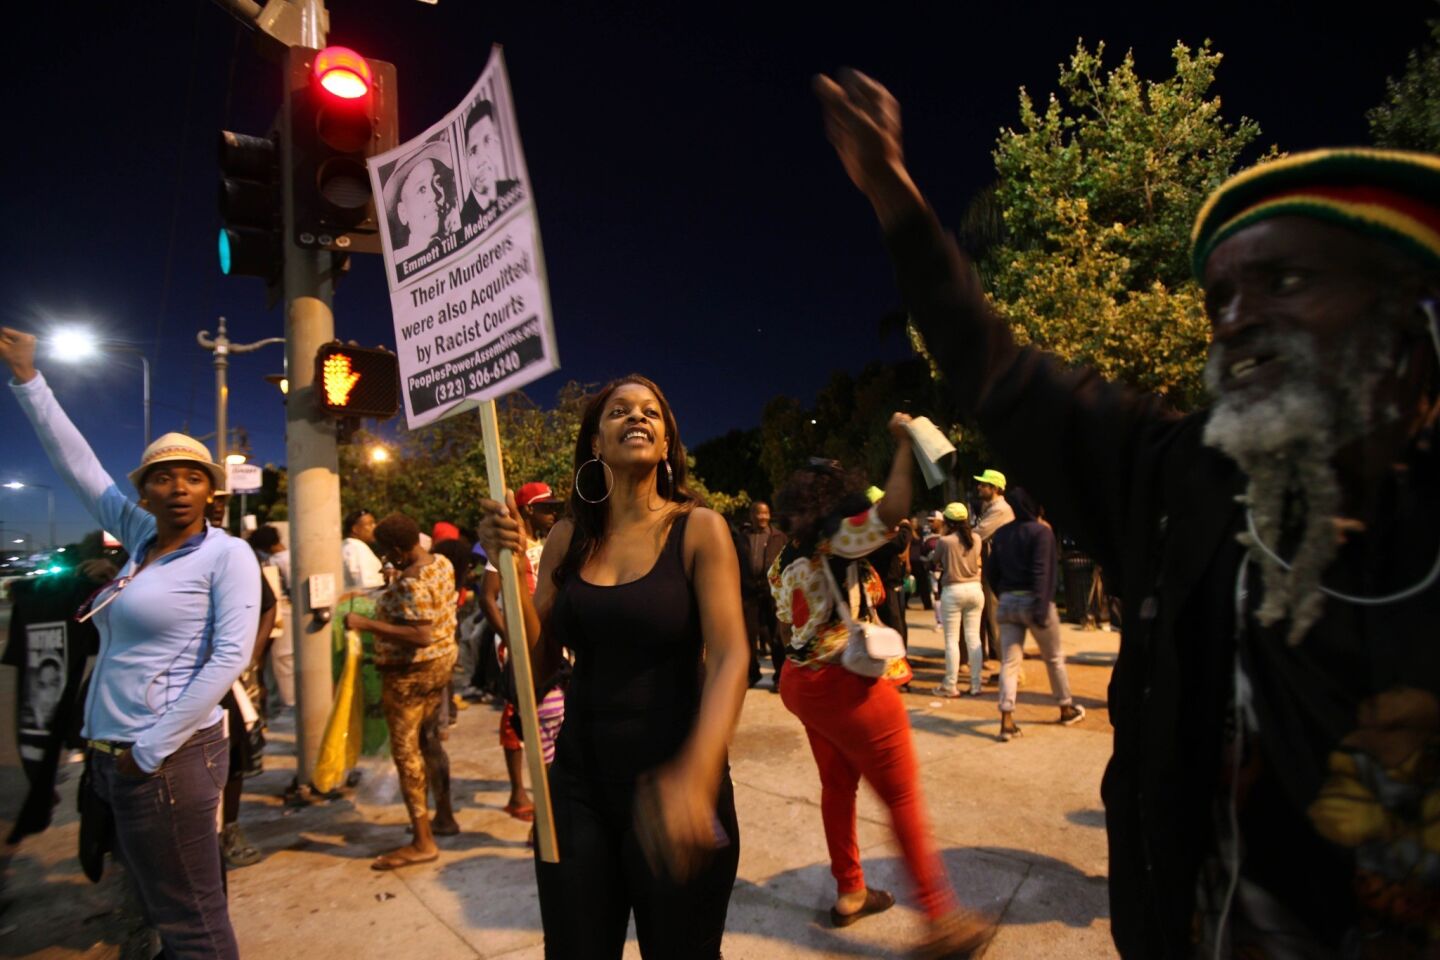 Protesters gather at Leimert Park on Tuesday evening to protest the verdict in the George Zimmerman trial. LAPD was out in full force after disturbances and violent protests on Monday night in the Crenshaw area.